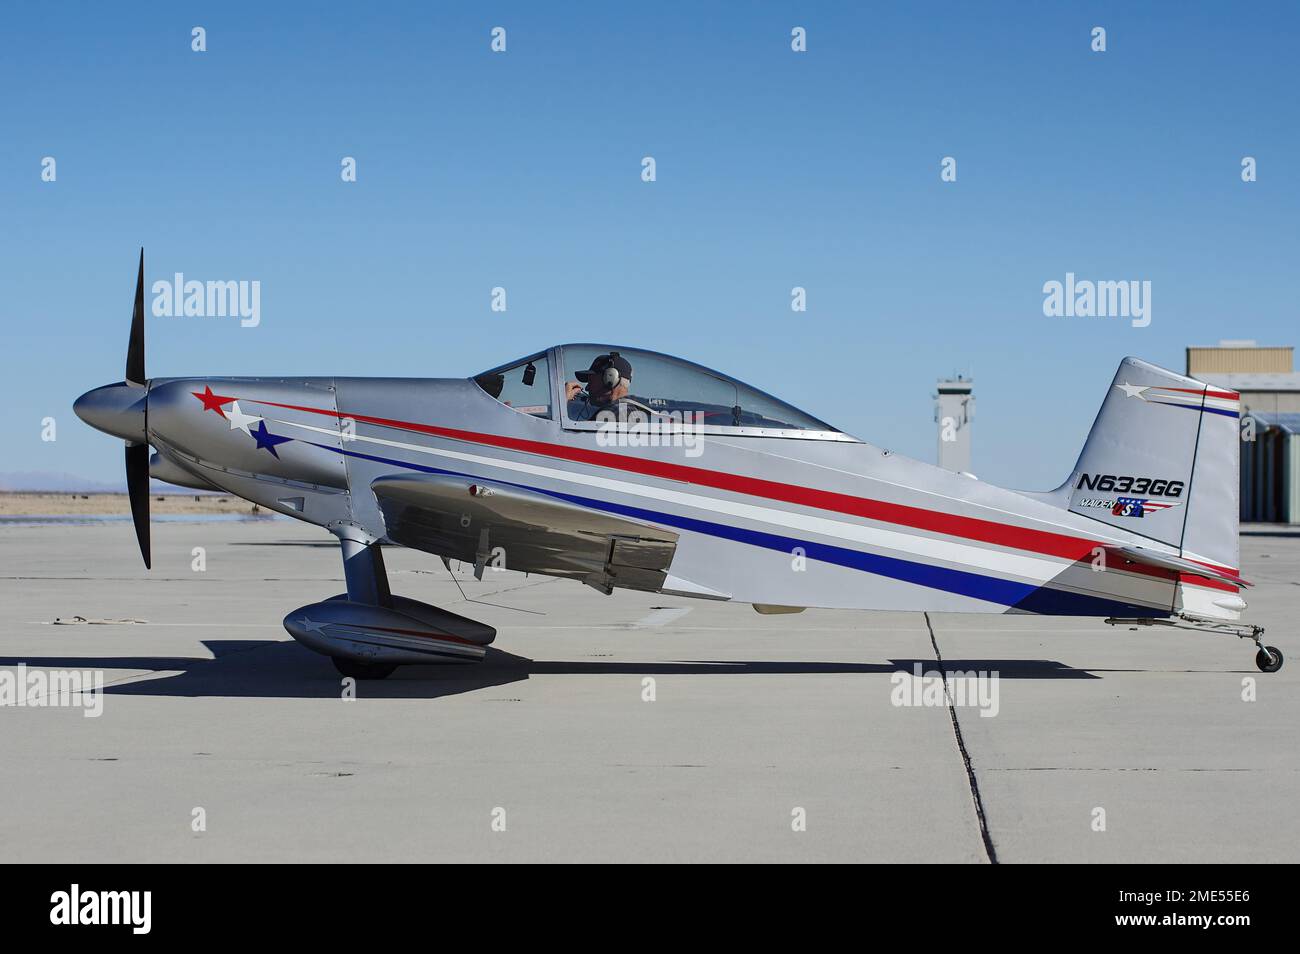 Mojave Air and Space Port, California, United States - January  21, 2023: 1985 Thorp T-18 aircraft with registration N633GG shown taxxing. Stock Photo